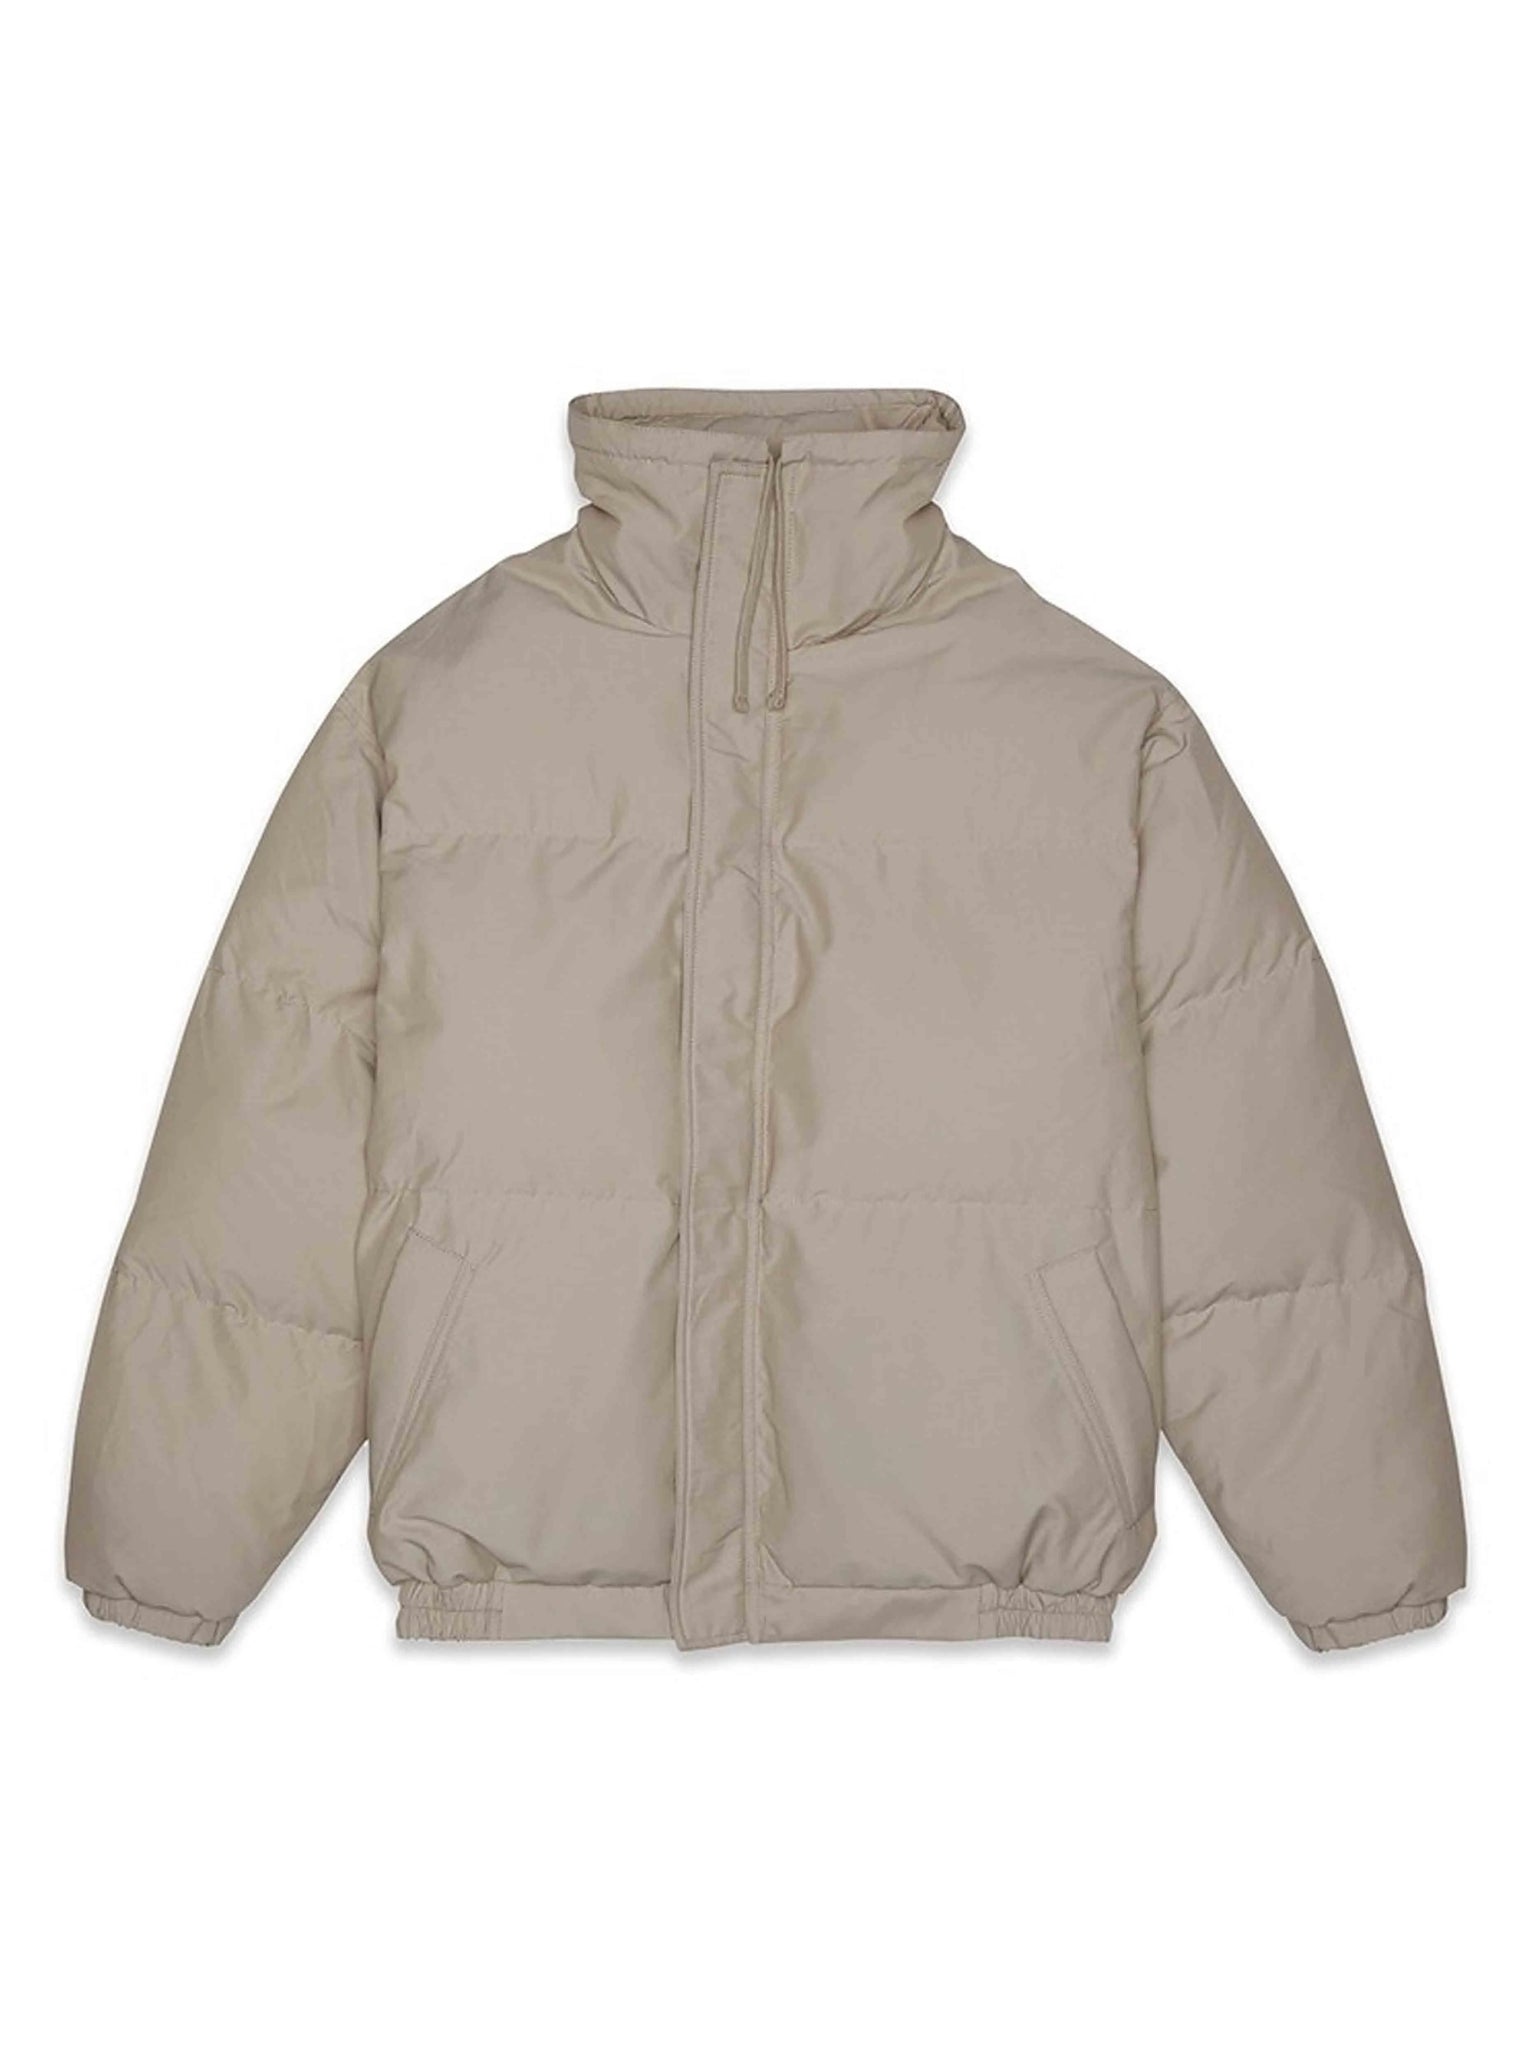 Fear Of God Essentials Puffer Jacket Taupe [FW20] Prior